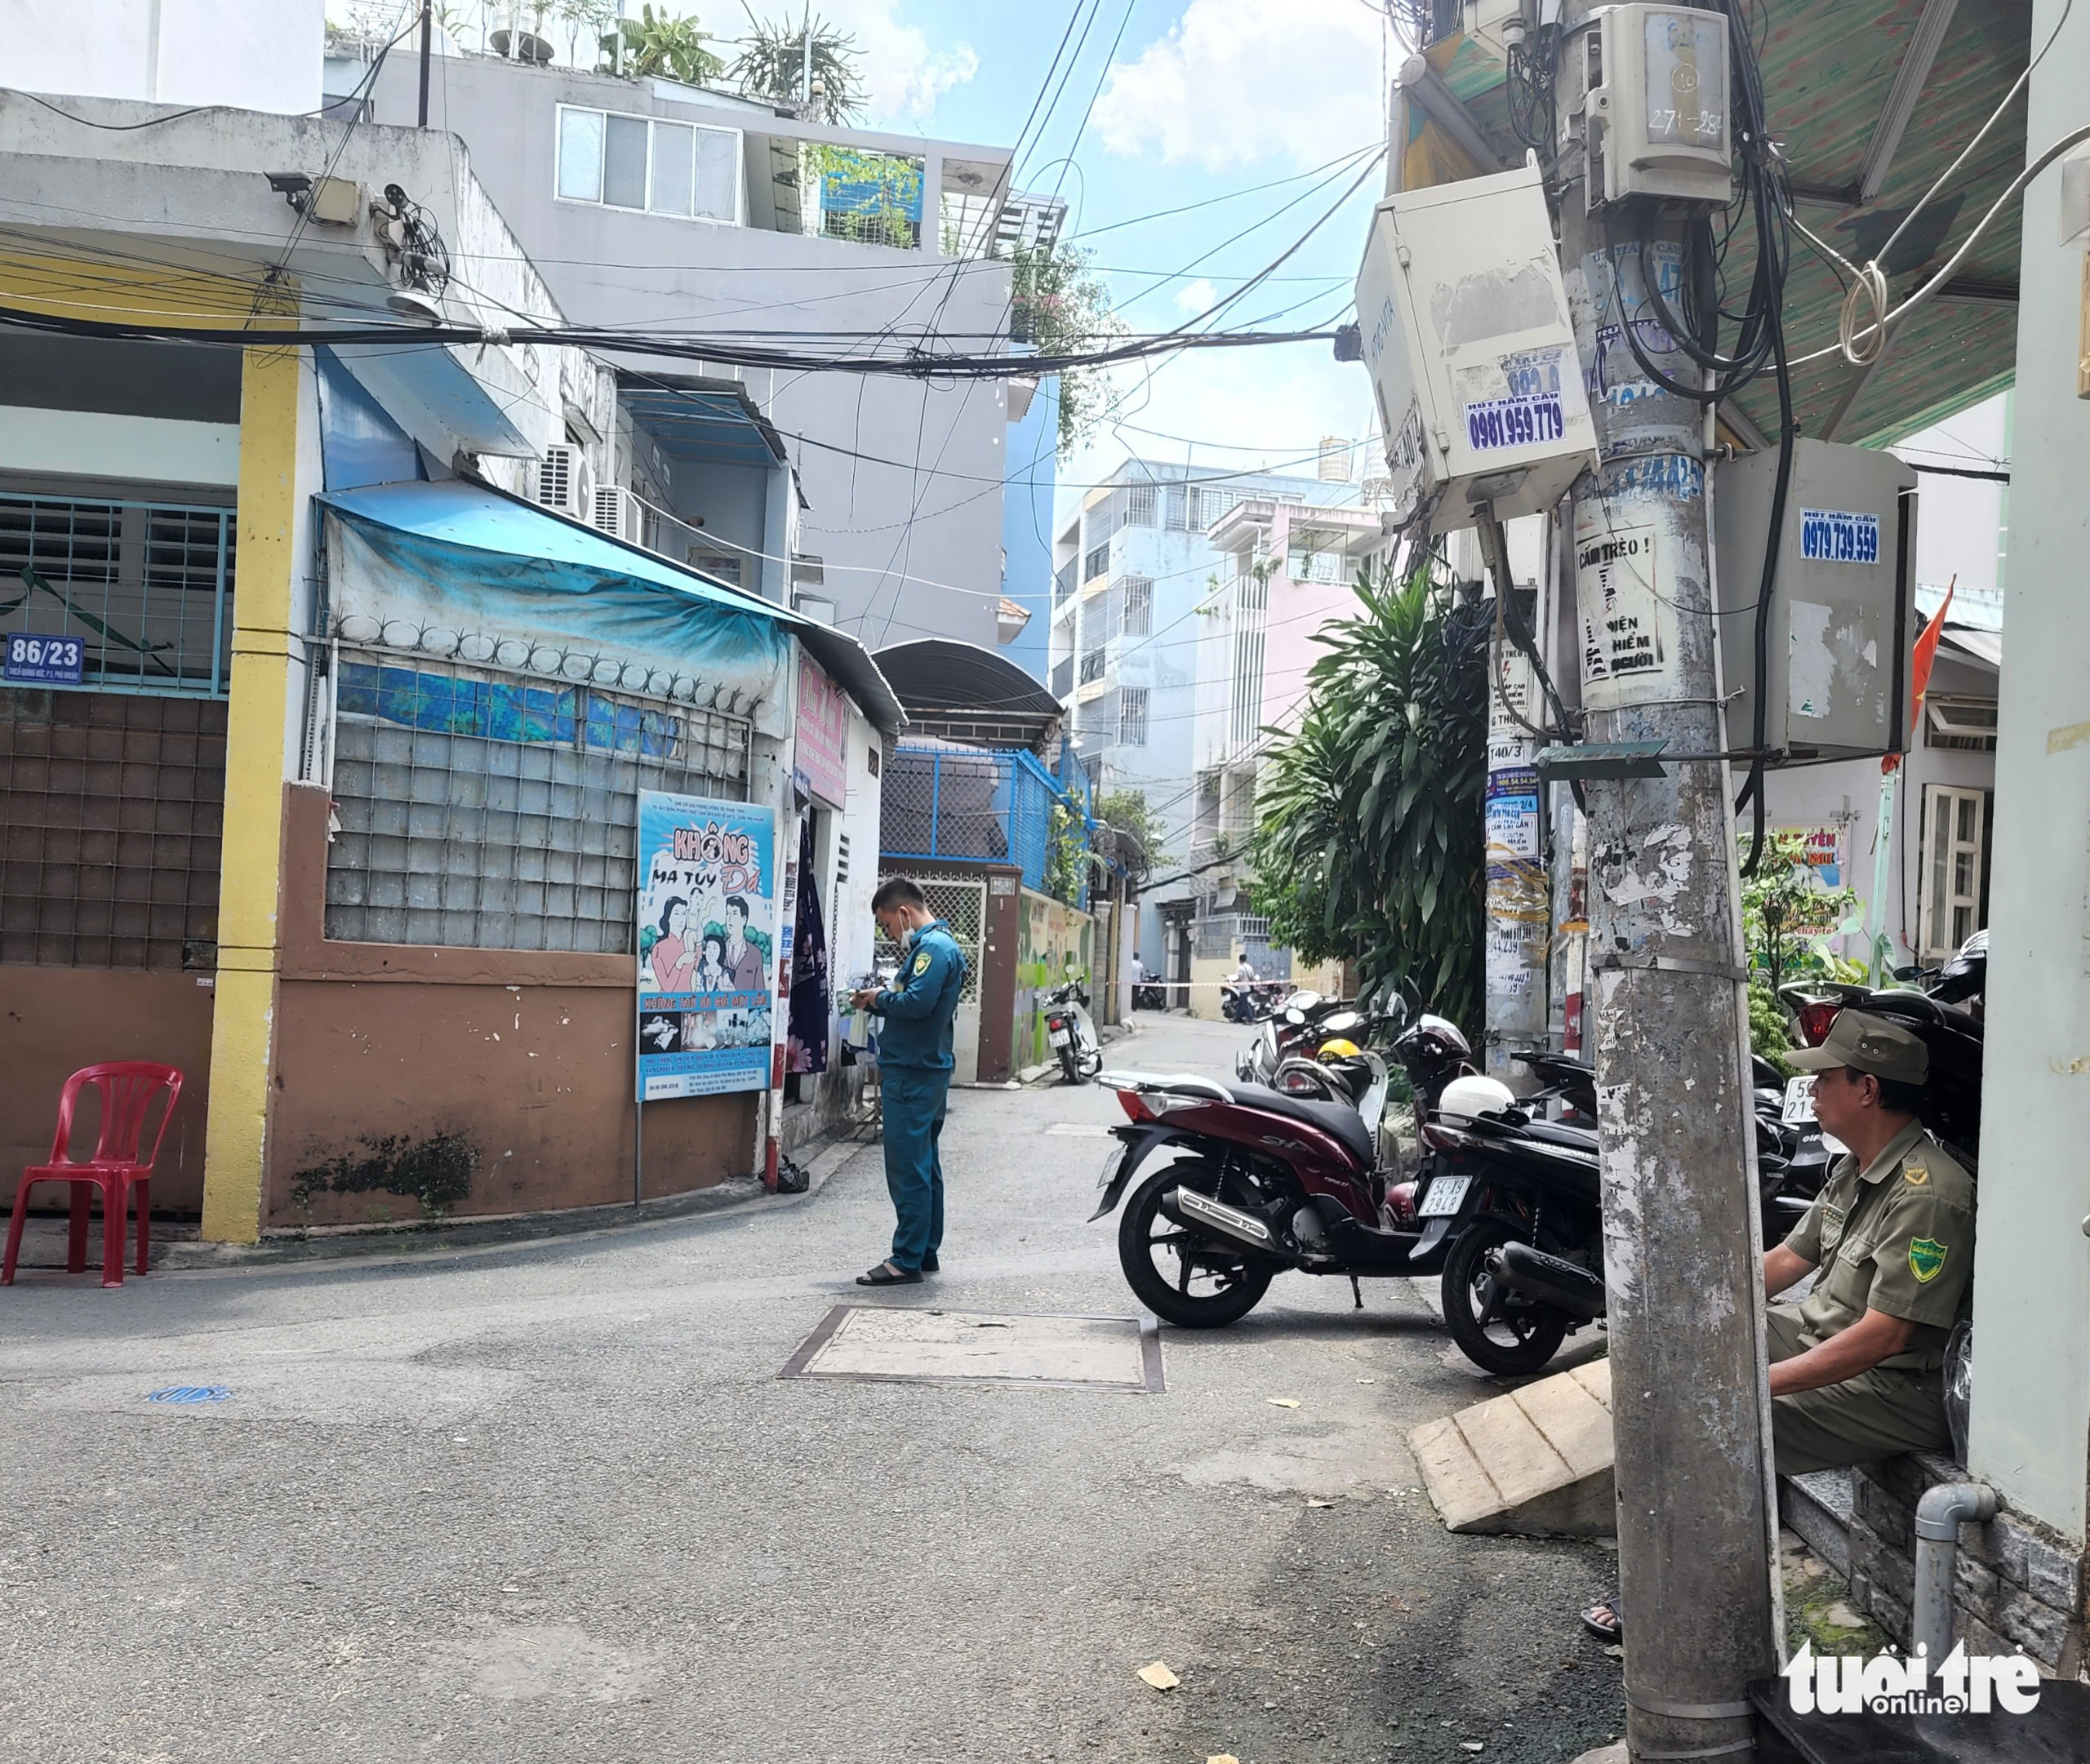 The alley where N.V.B.’s house is located in Phu Nhuan District, Ho Chi Minh City, June 7, 2022. Photo: Dan Thuan / Tuoi Tre